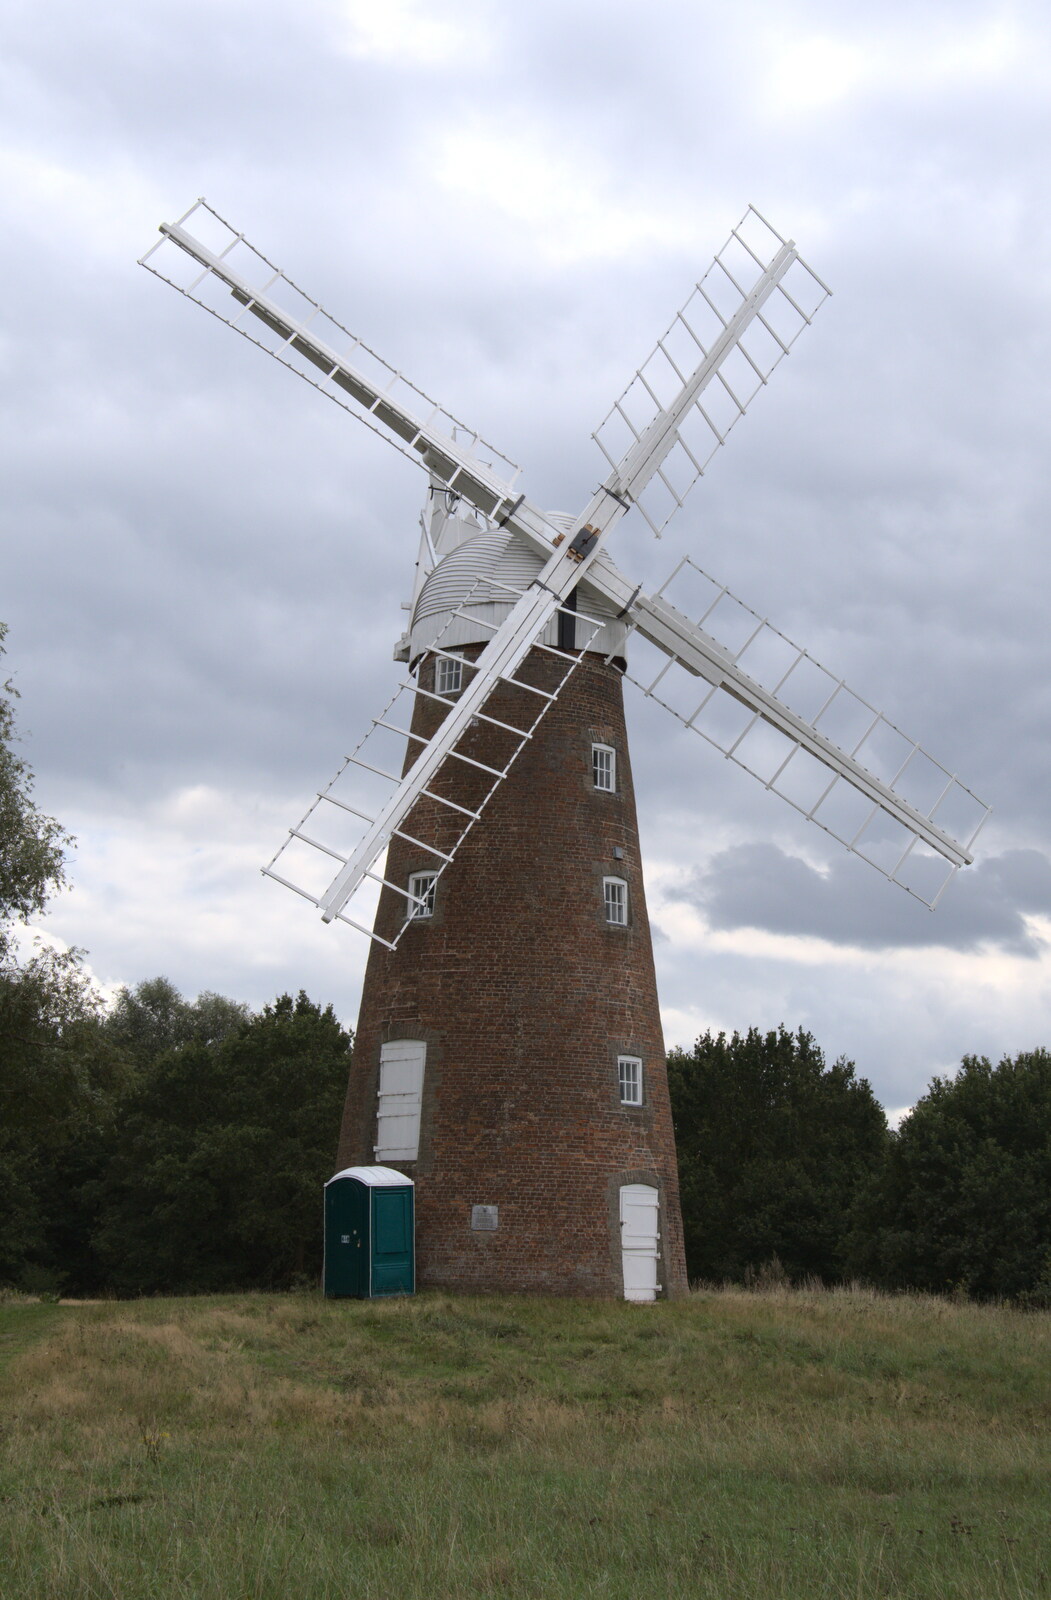 Camping at Three Rivers, Geldeston, Norfolk - 5th September 2020: Billingford Windmill is now full re-sailed